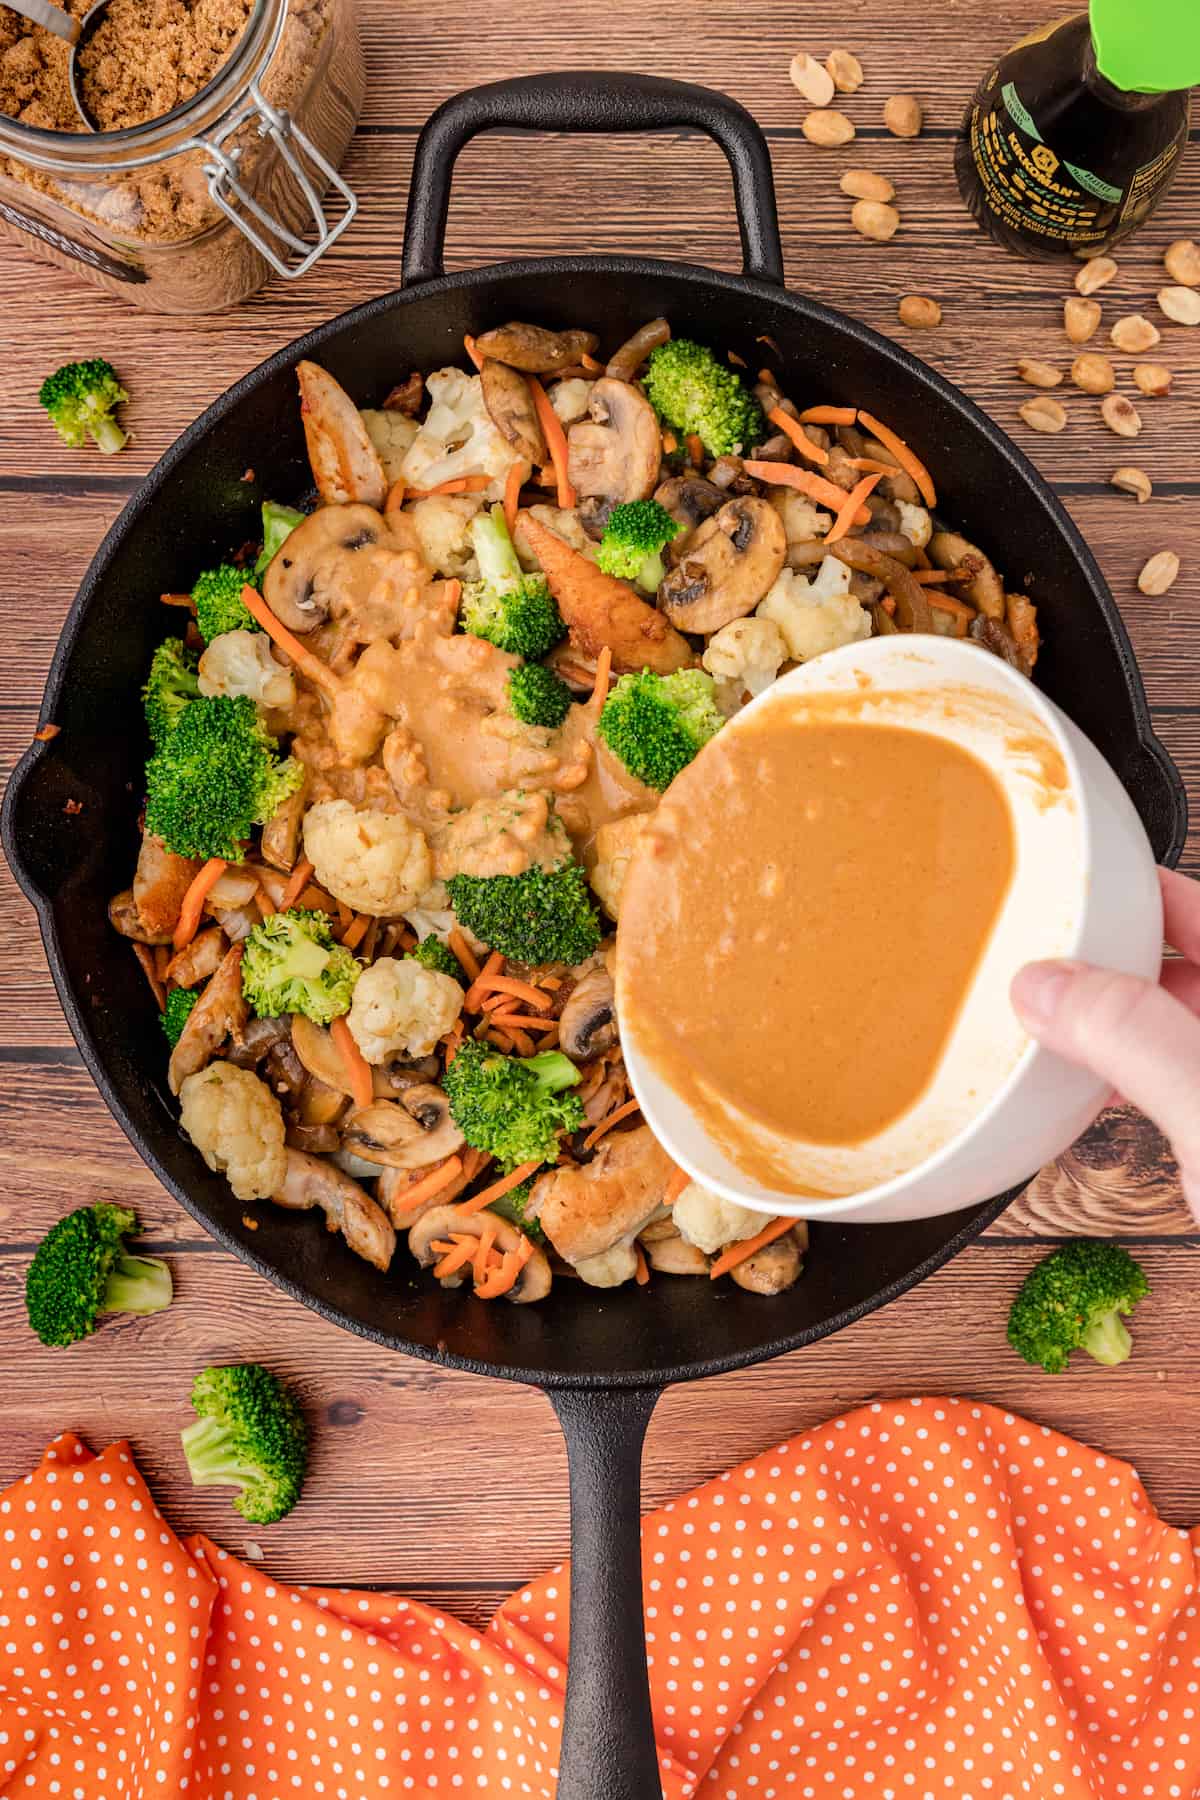 pour the peanut stir fry sauce over the chicken and veggies in the skillet